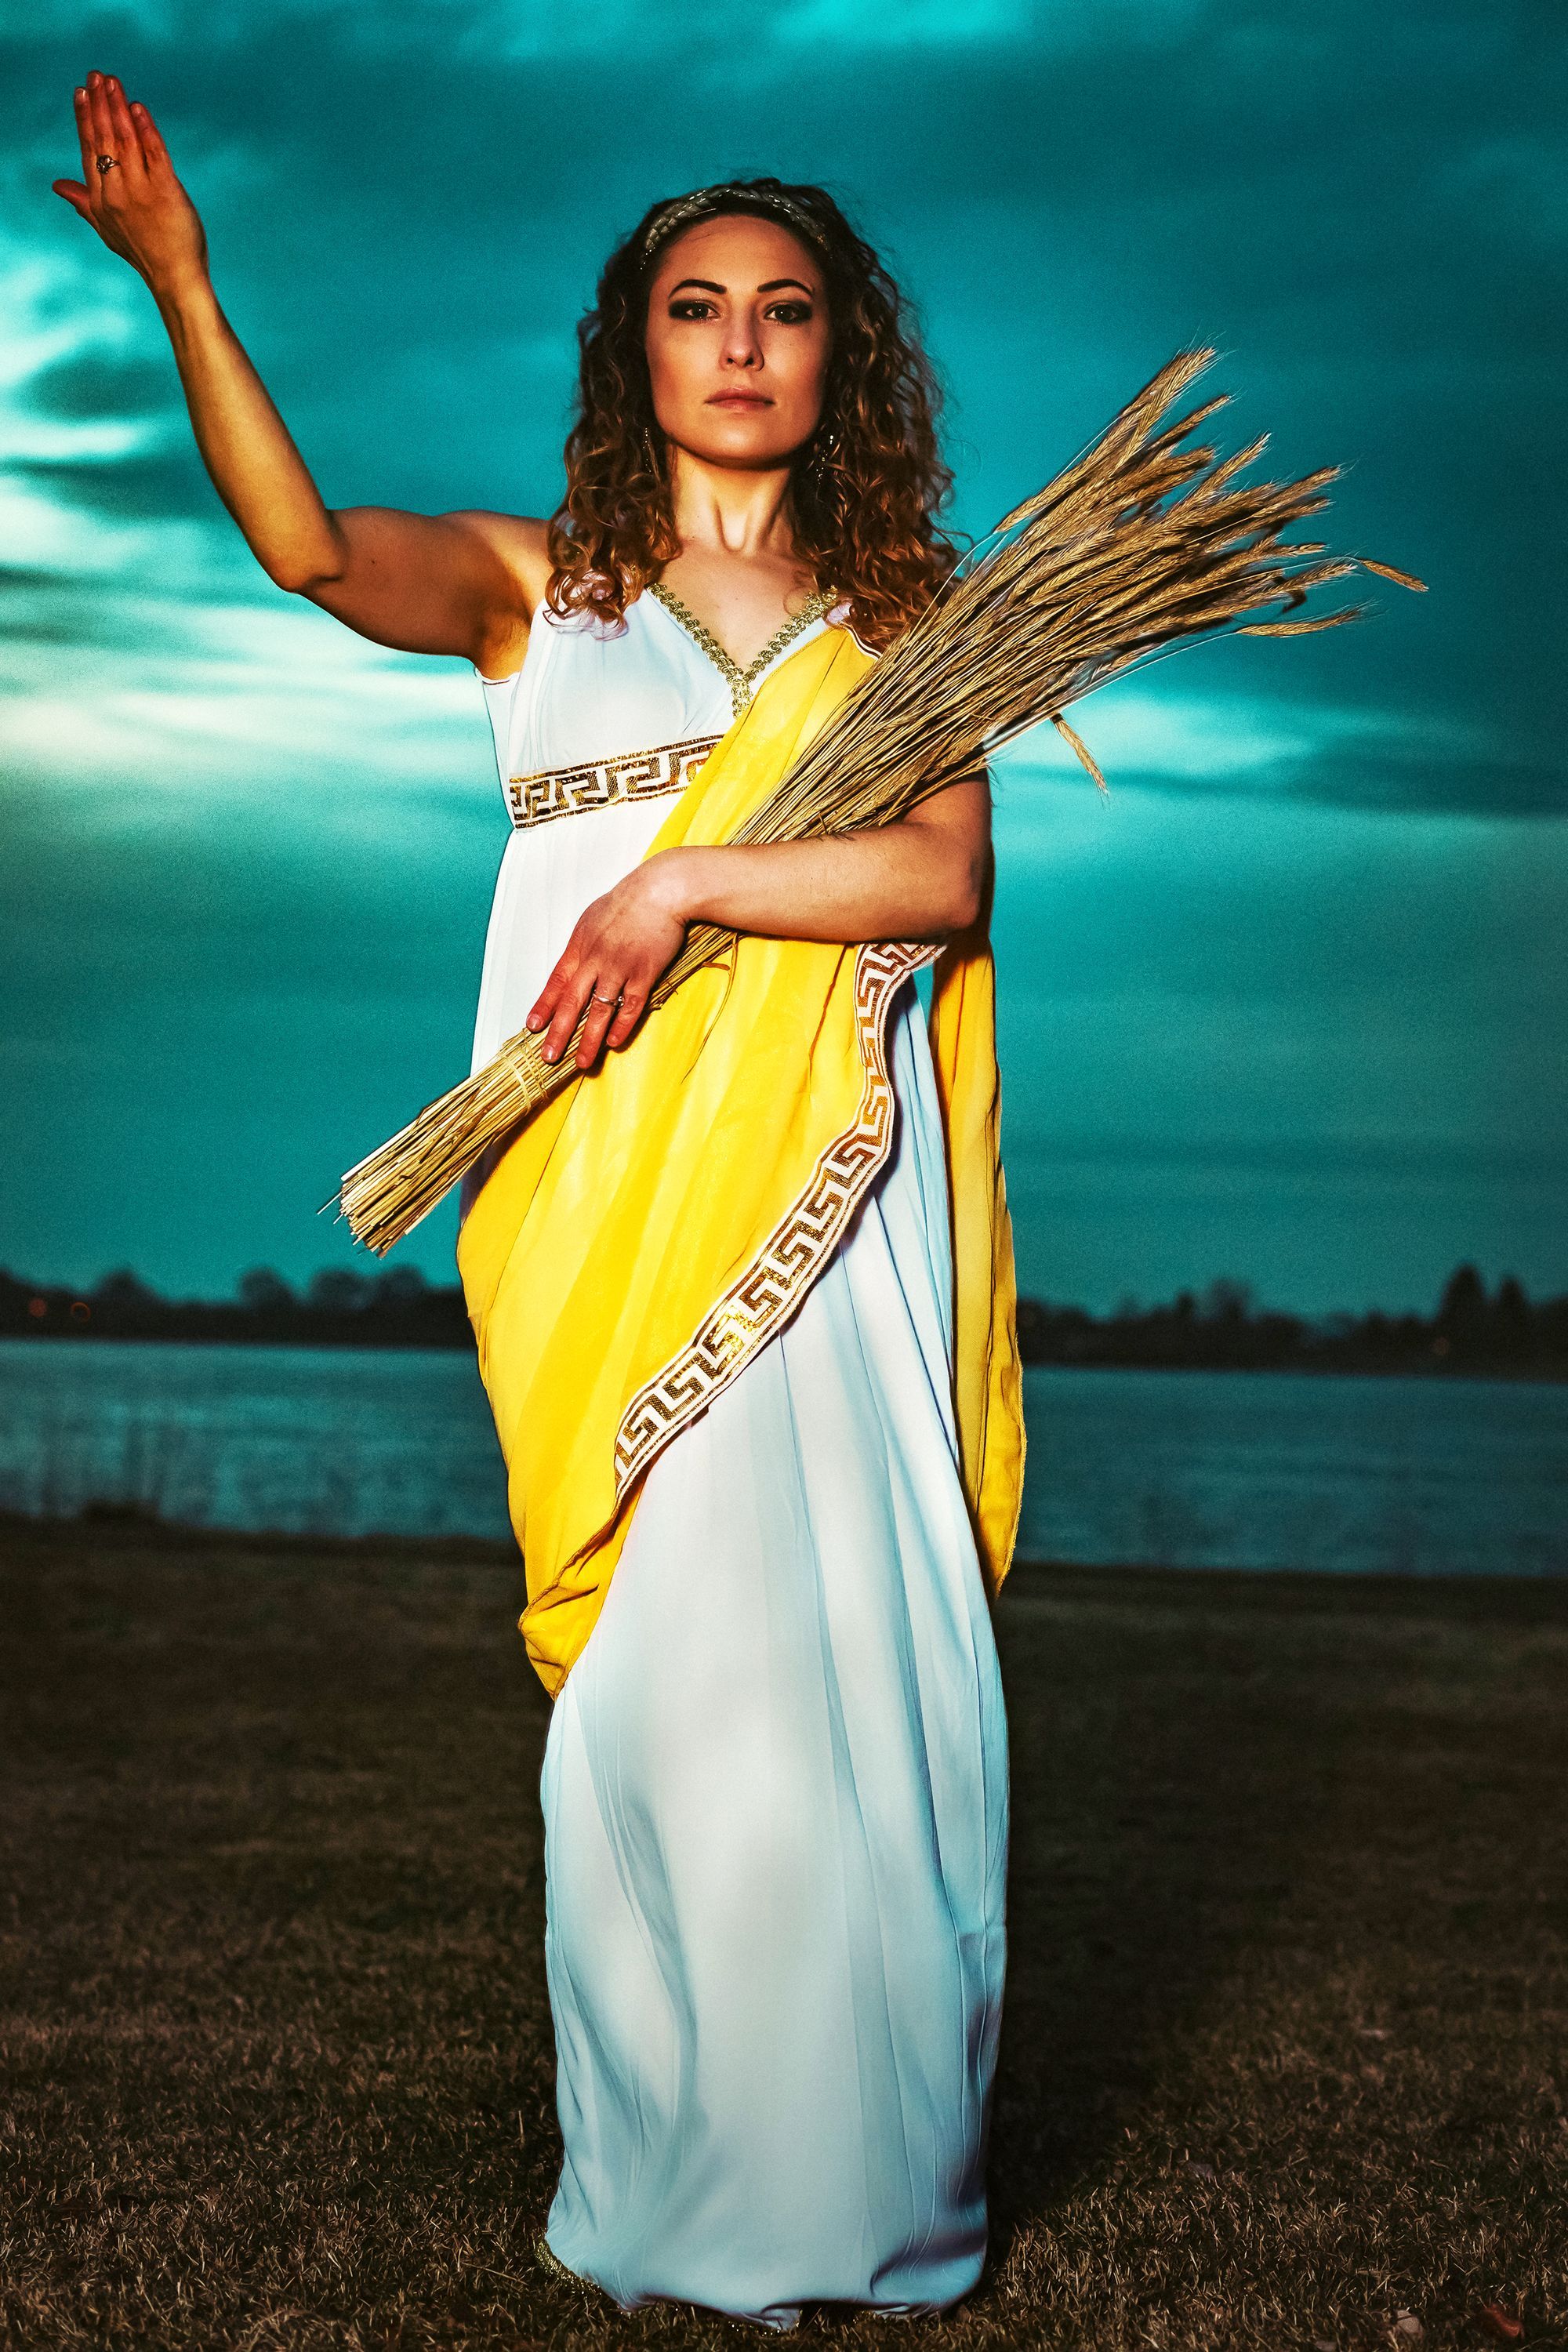 Photograph of woman in toga holding wheat in one arm and holding up her other arm, in front of a river